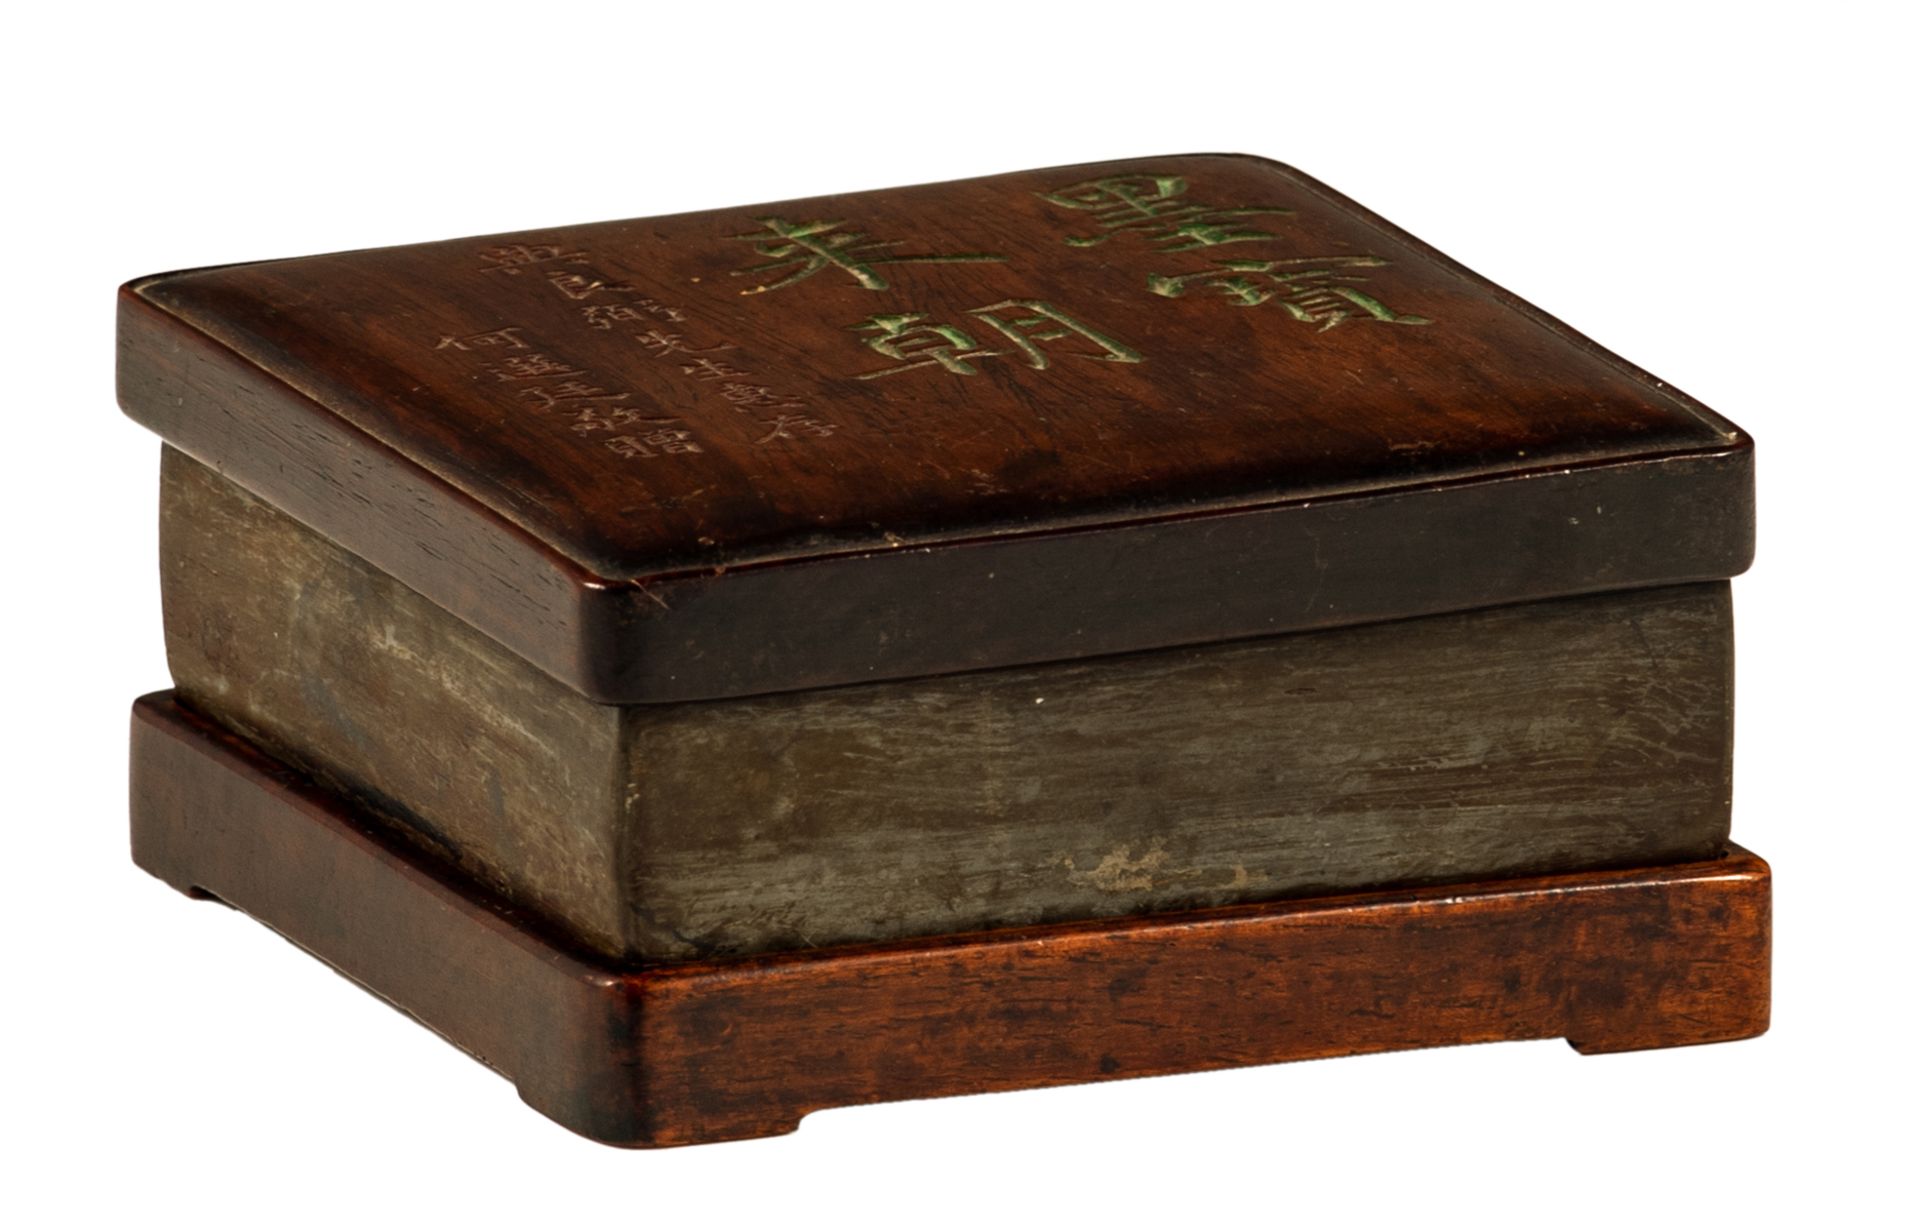 A Chinese ink stone in a wooden box and cover, the cover decorated with calligraphic texts, H 6 - W